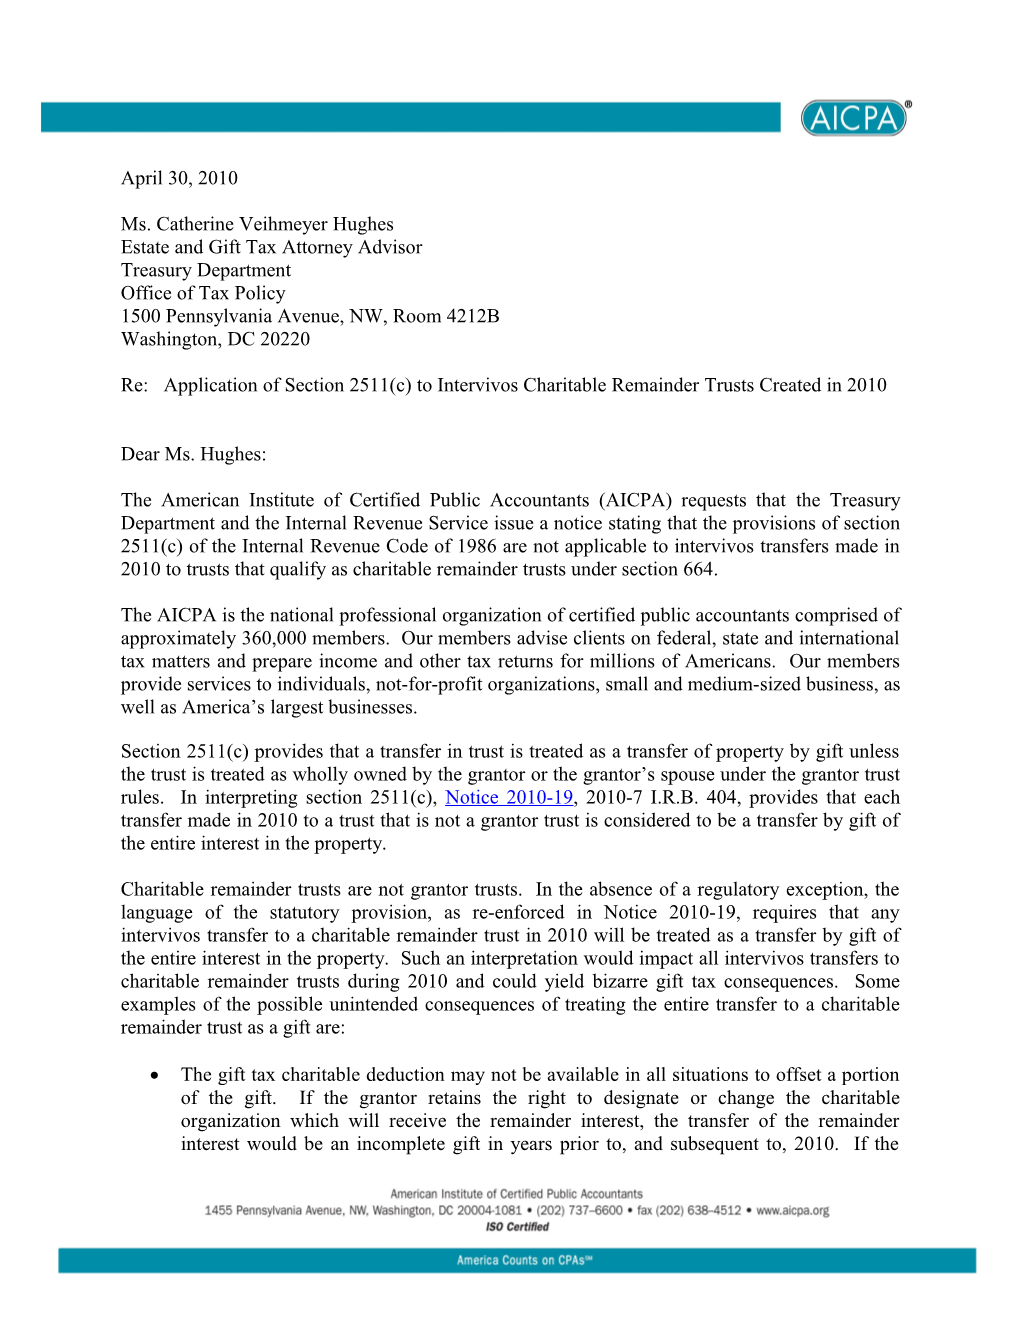 AICPA Letter to IRS on Section 2511 and Crts - April 30, 2010